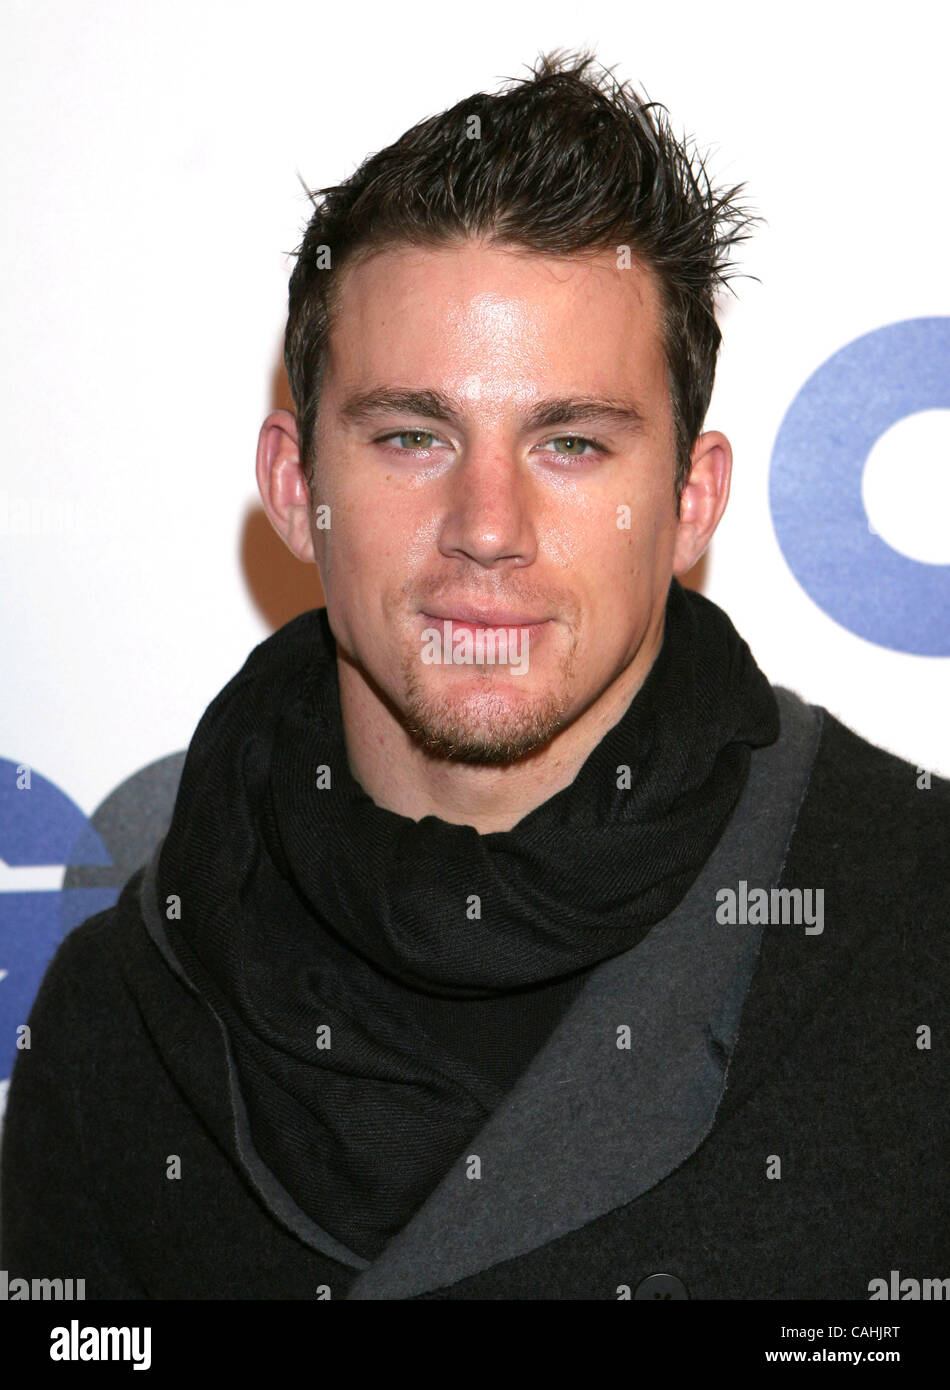 Dec 05, 2007; Hollywood, California, USA; Actor CHANNING TATUM  at the GQ Magazines 'Men Of The Year' Celebration held at the Chateau Marmont, Hollywood. Mandatory Credit: Photo by Paul Fenton/ZUMA Press. (©) Copyright 2007 by Paul Fenton Stock Photo